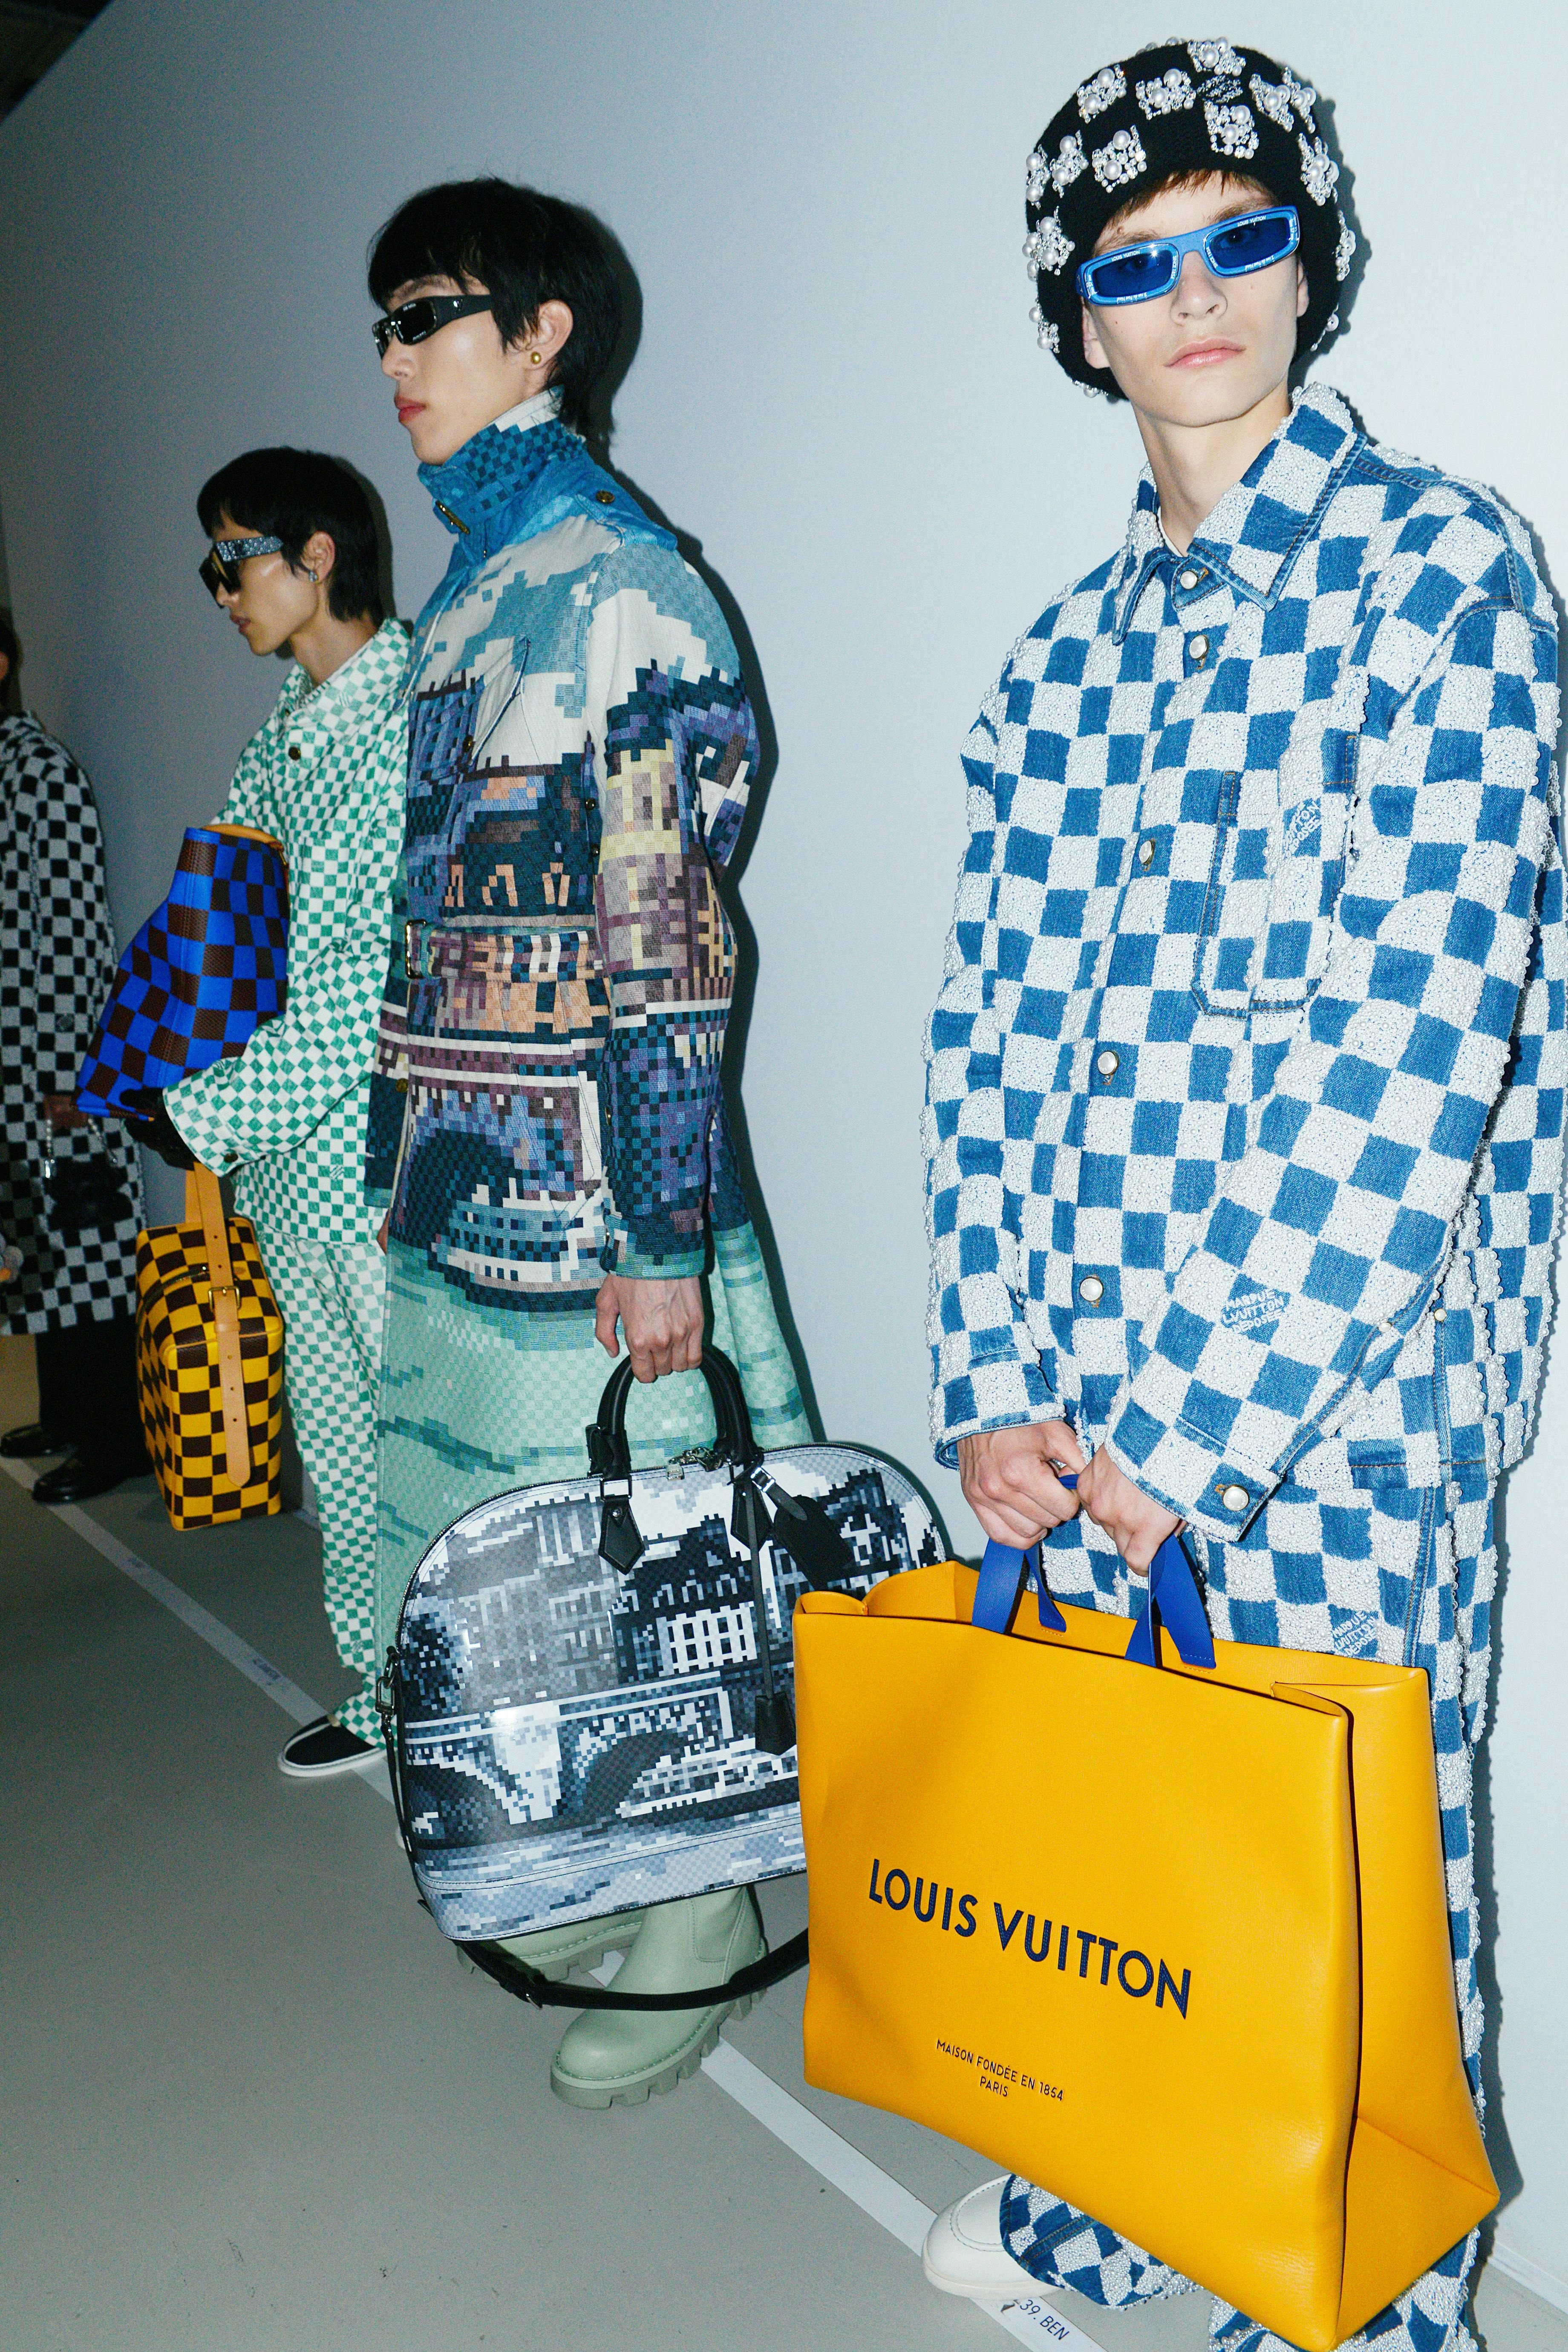 A model in a checker jacket holding a yellow tote bag.